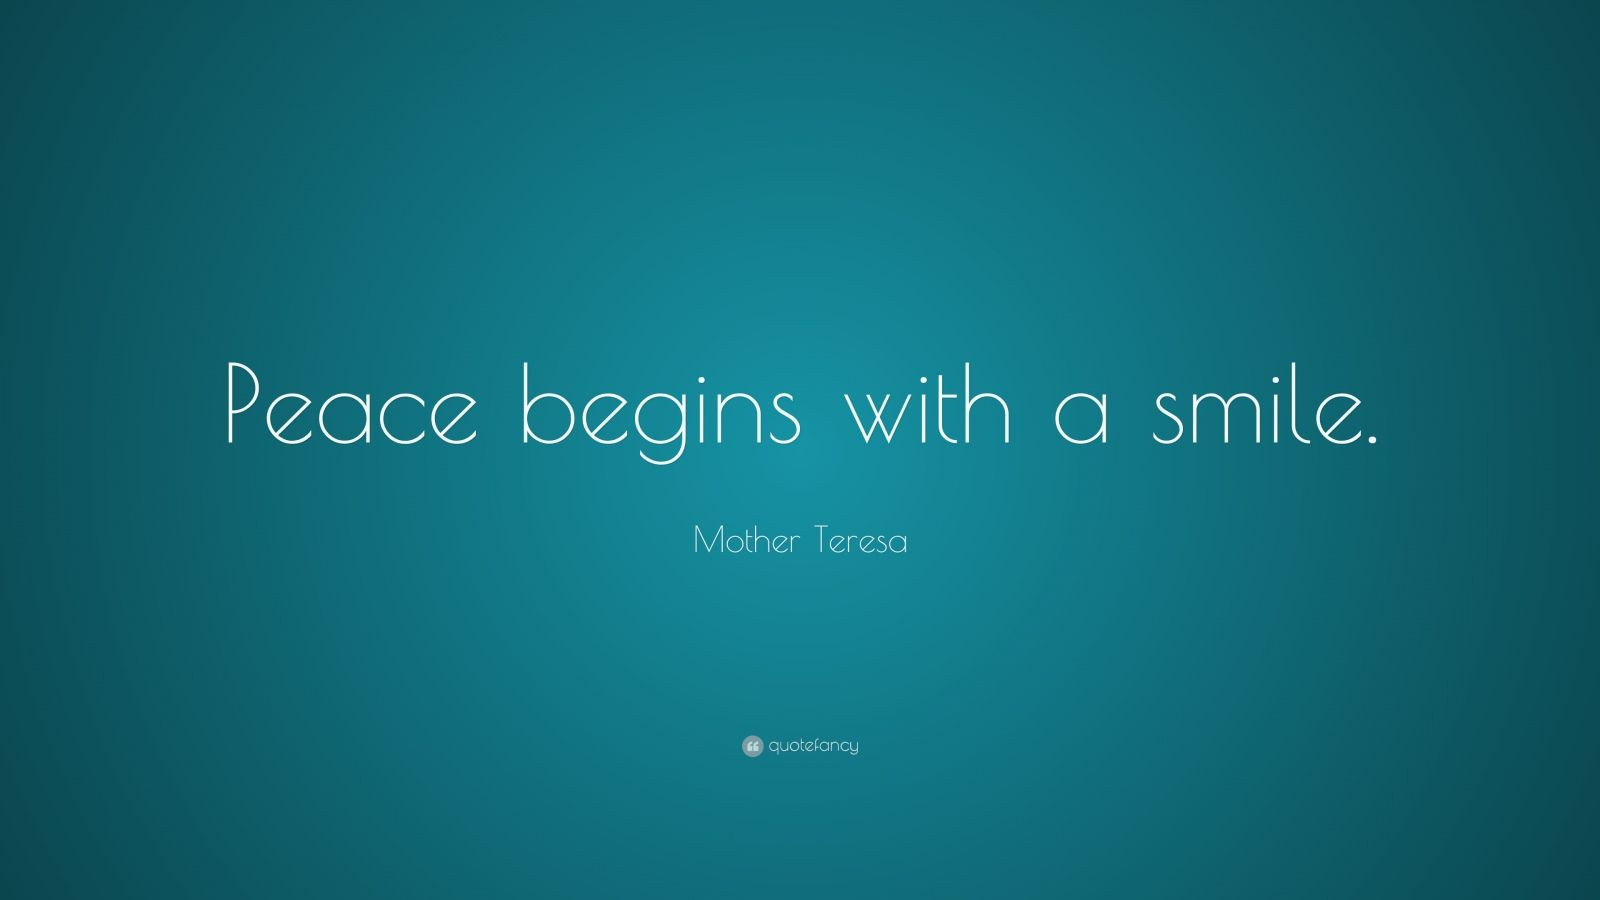 Mother Teresa Smile Quotes
 Mother Teresa Quotes 12 wallpapers Quotefancy